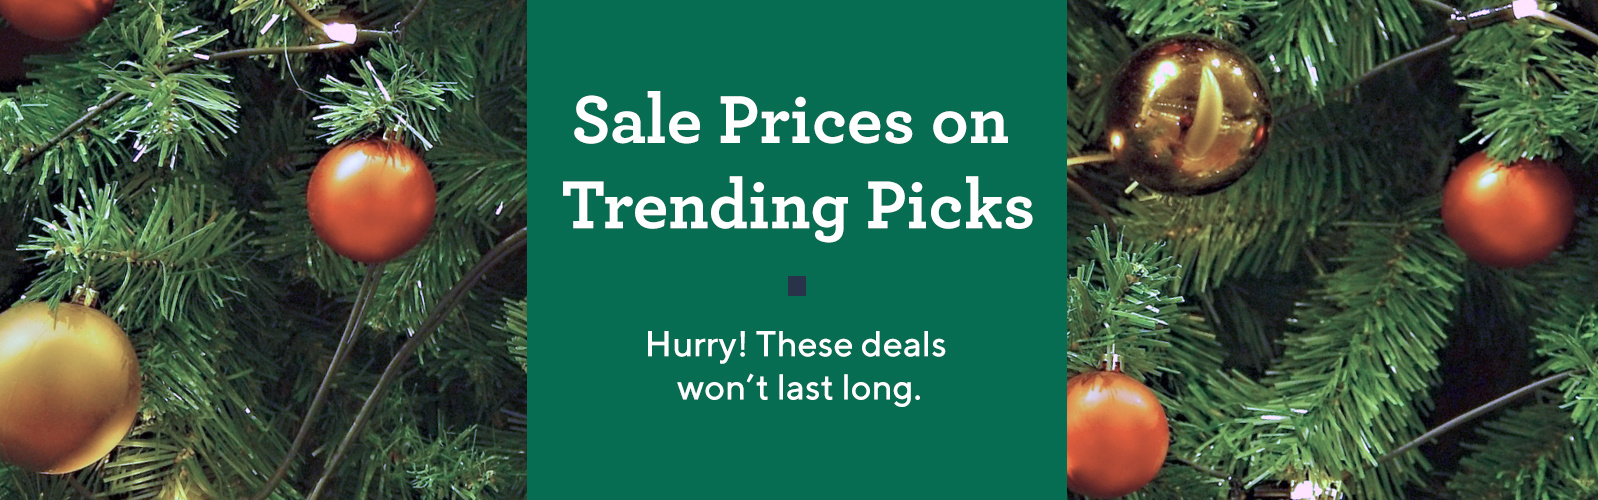 Sale Prices on Trending Picks  Hurry! These deals won't last long.